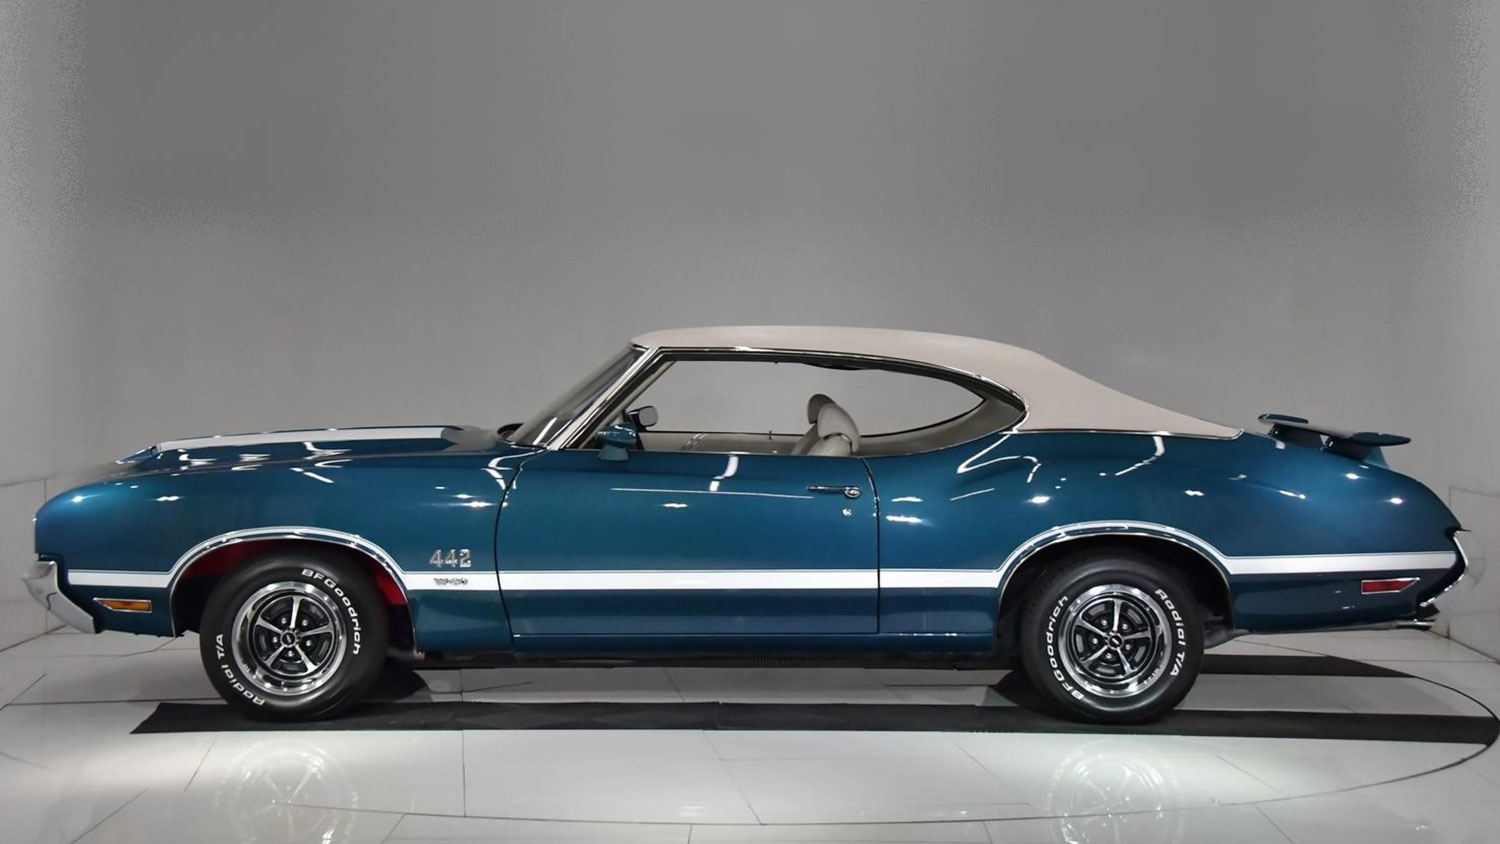 Like New 1970 Oldsmobile 442 Coupe For Sale Video